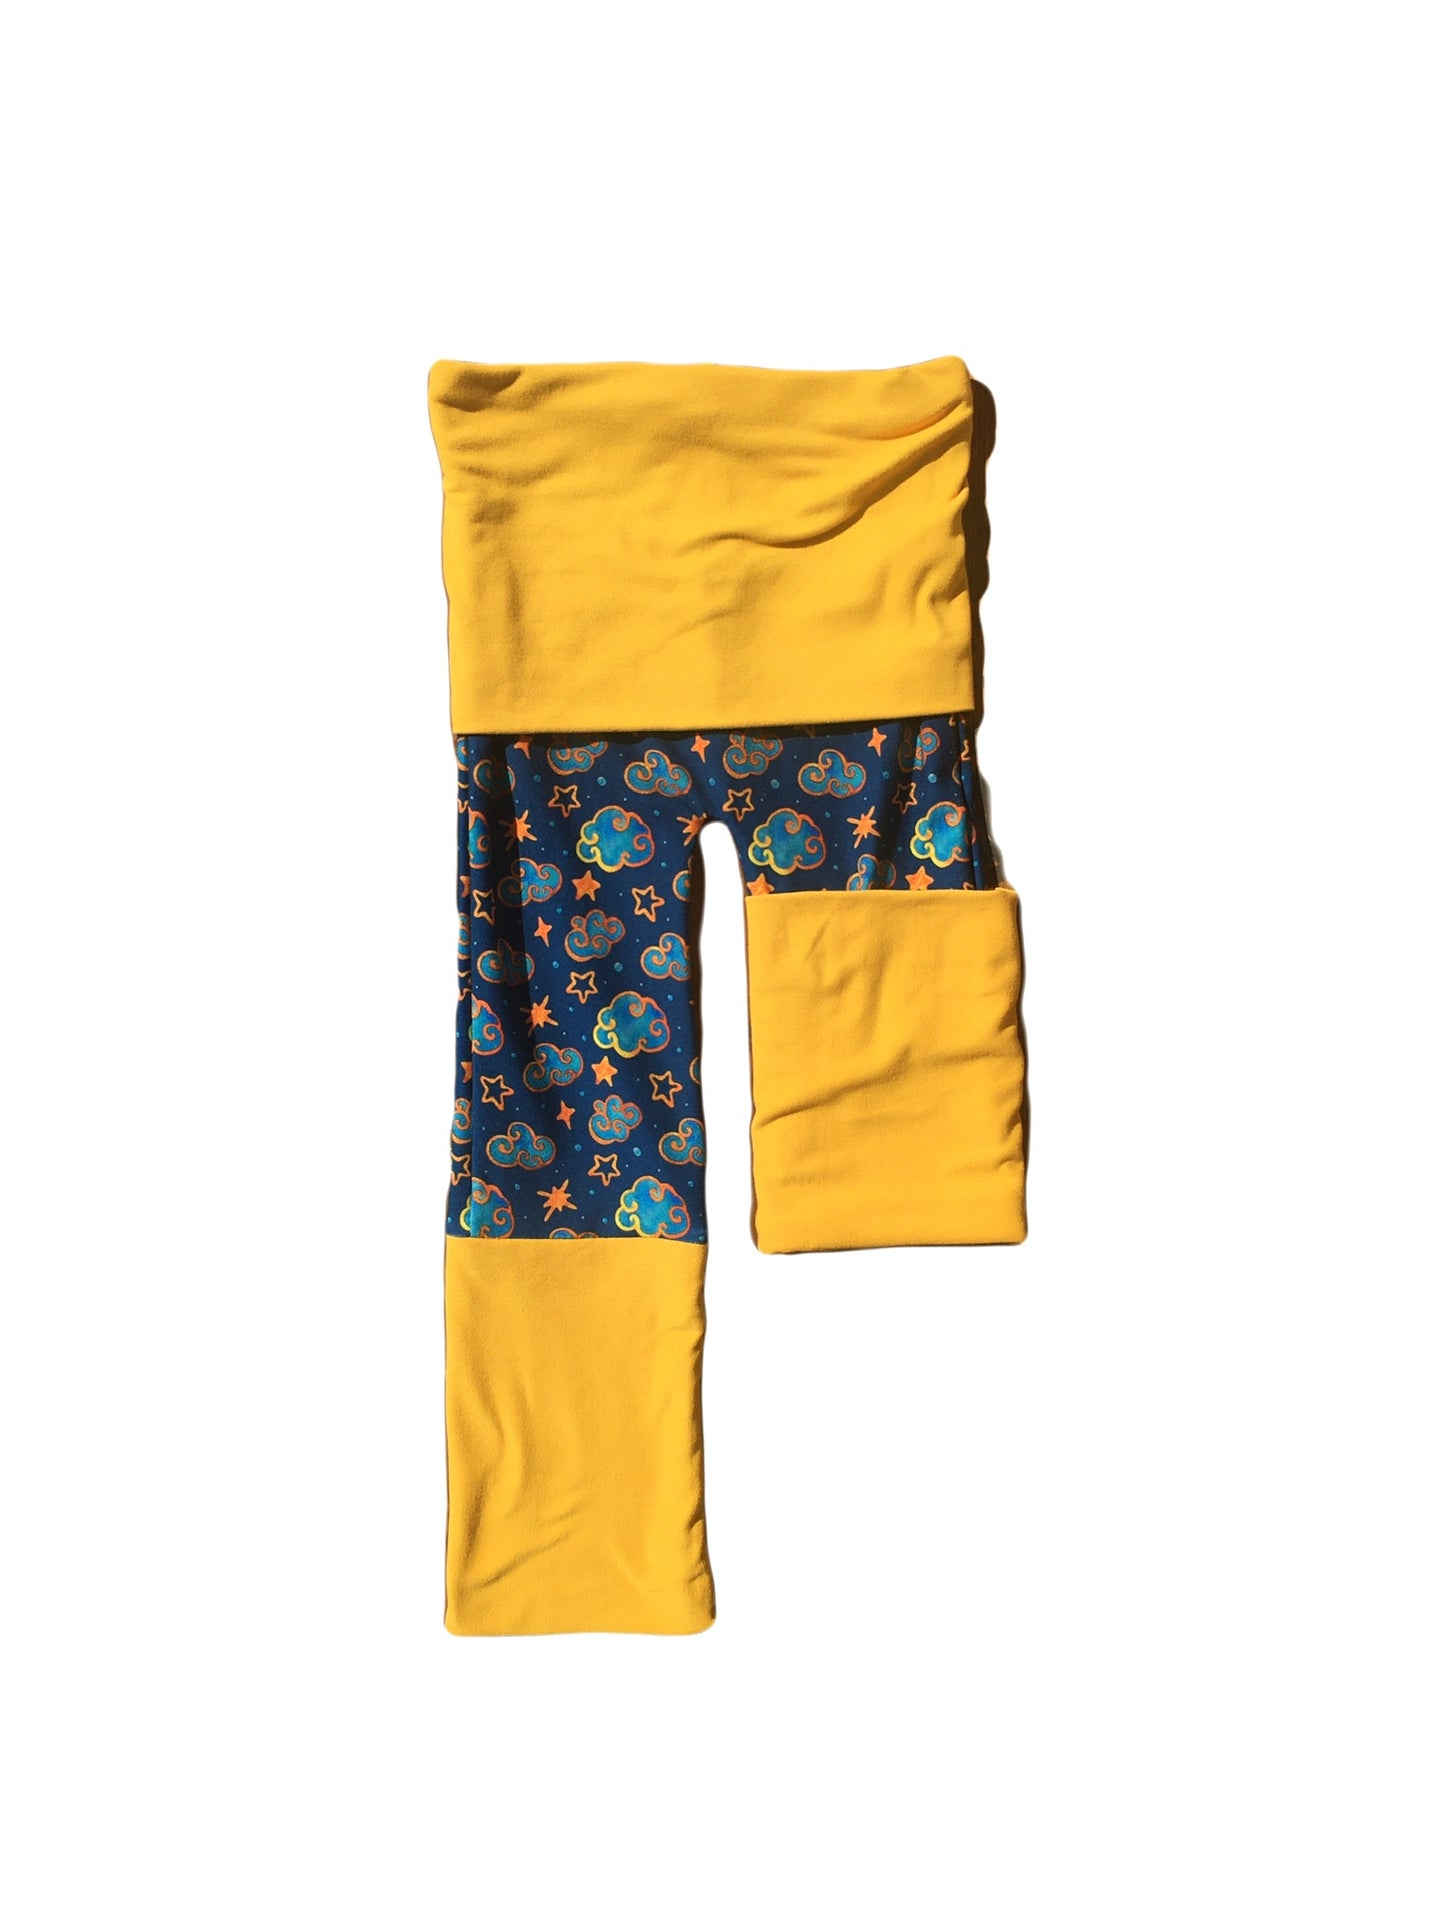 Adjustable Pants - Clouds with Yellow